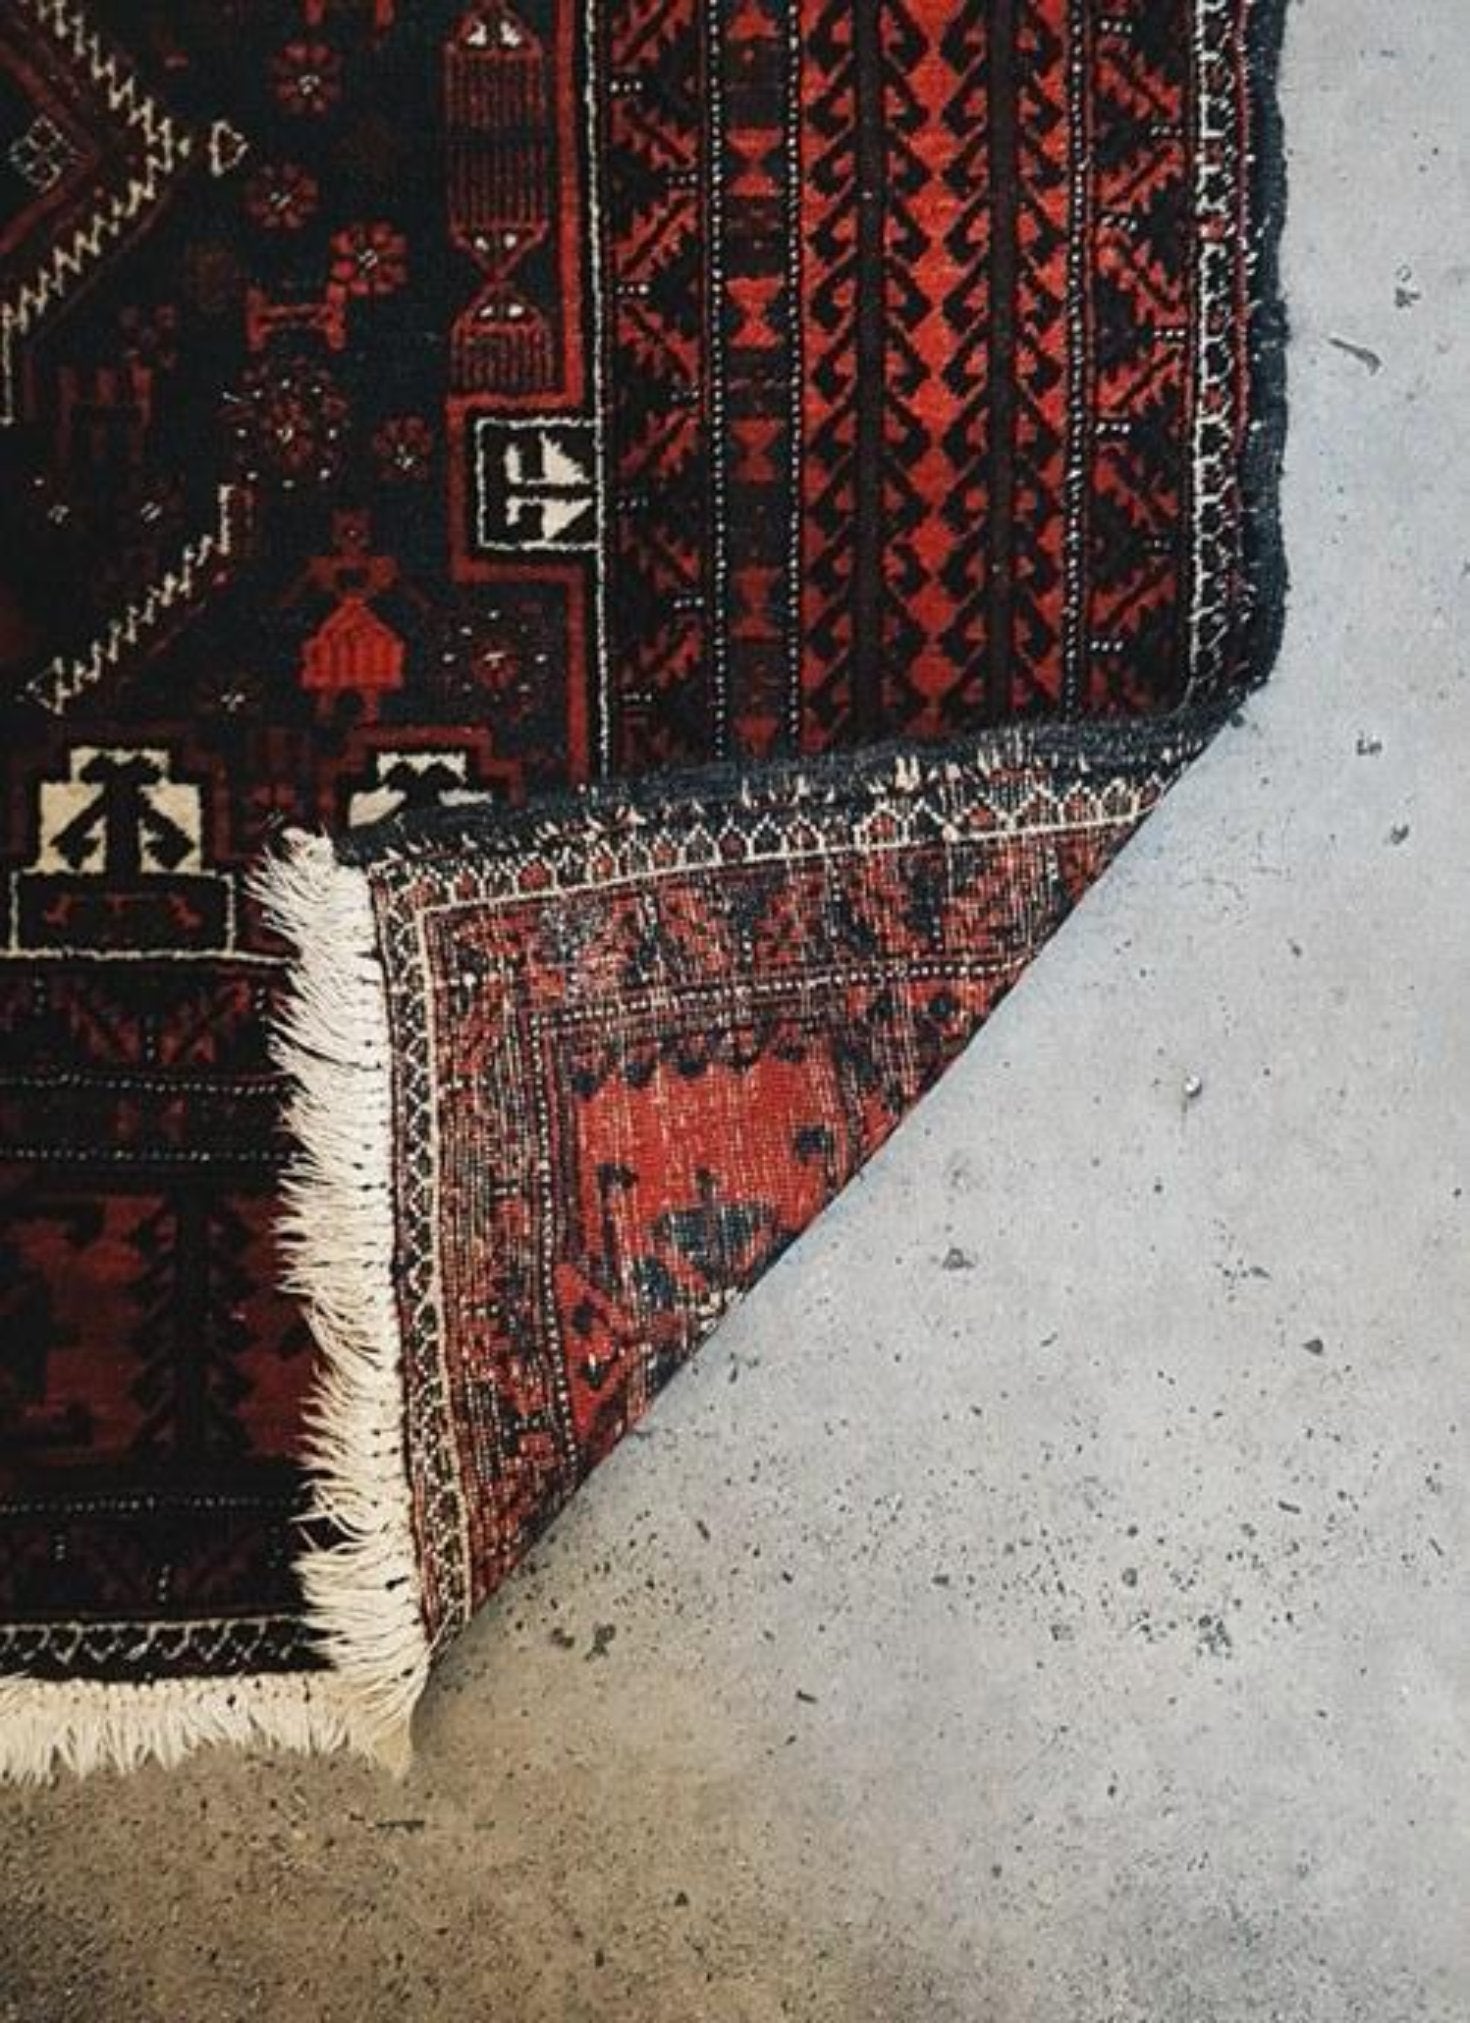 Second Hand Persian Rugs UK By How Bizarre Rugs 